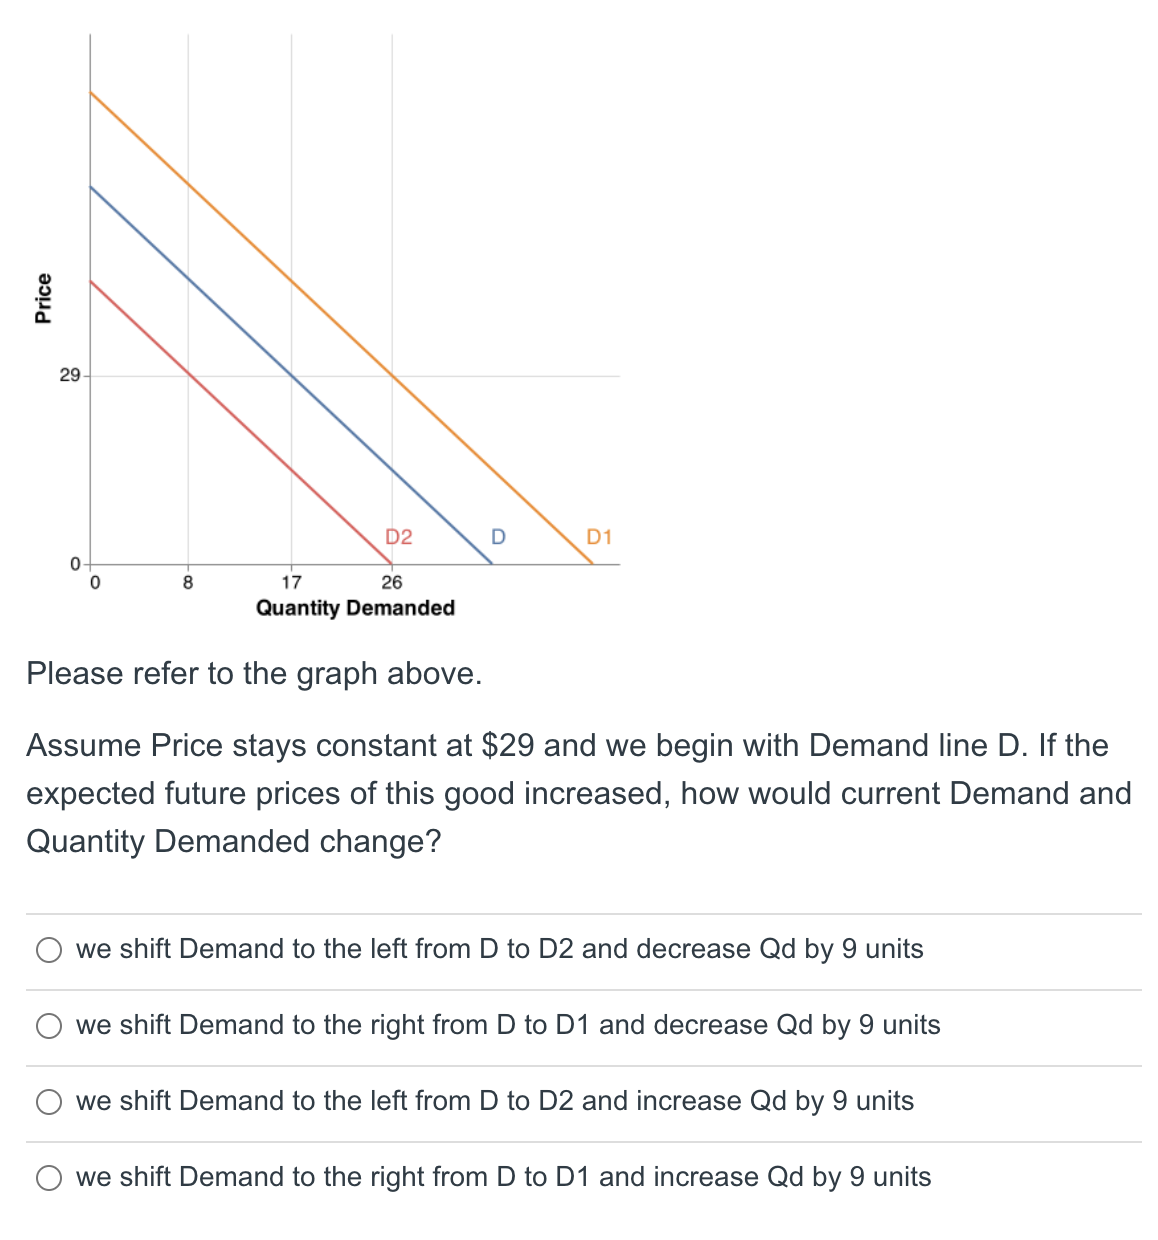 Price
29
0
0
8
D2
17
26
Quantity Demanded
D
D1
Please refer to the graph above.
Assume Price stays constant at $29 and we begin with Demand line D. If the
expected future prices of this good increased, how would current Demand and
Quantity Demanded change?
we shift Demand to the left from D to D2 and decrease Qd by 9 units
we shift Demand to the right from D to D1 and decrease Qd by 9 units
we shift Demand to the left from D to D2 and increase Qd by 9 units
we shift Demand to the right from D to D1 and increase Qd by 9 units